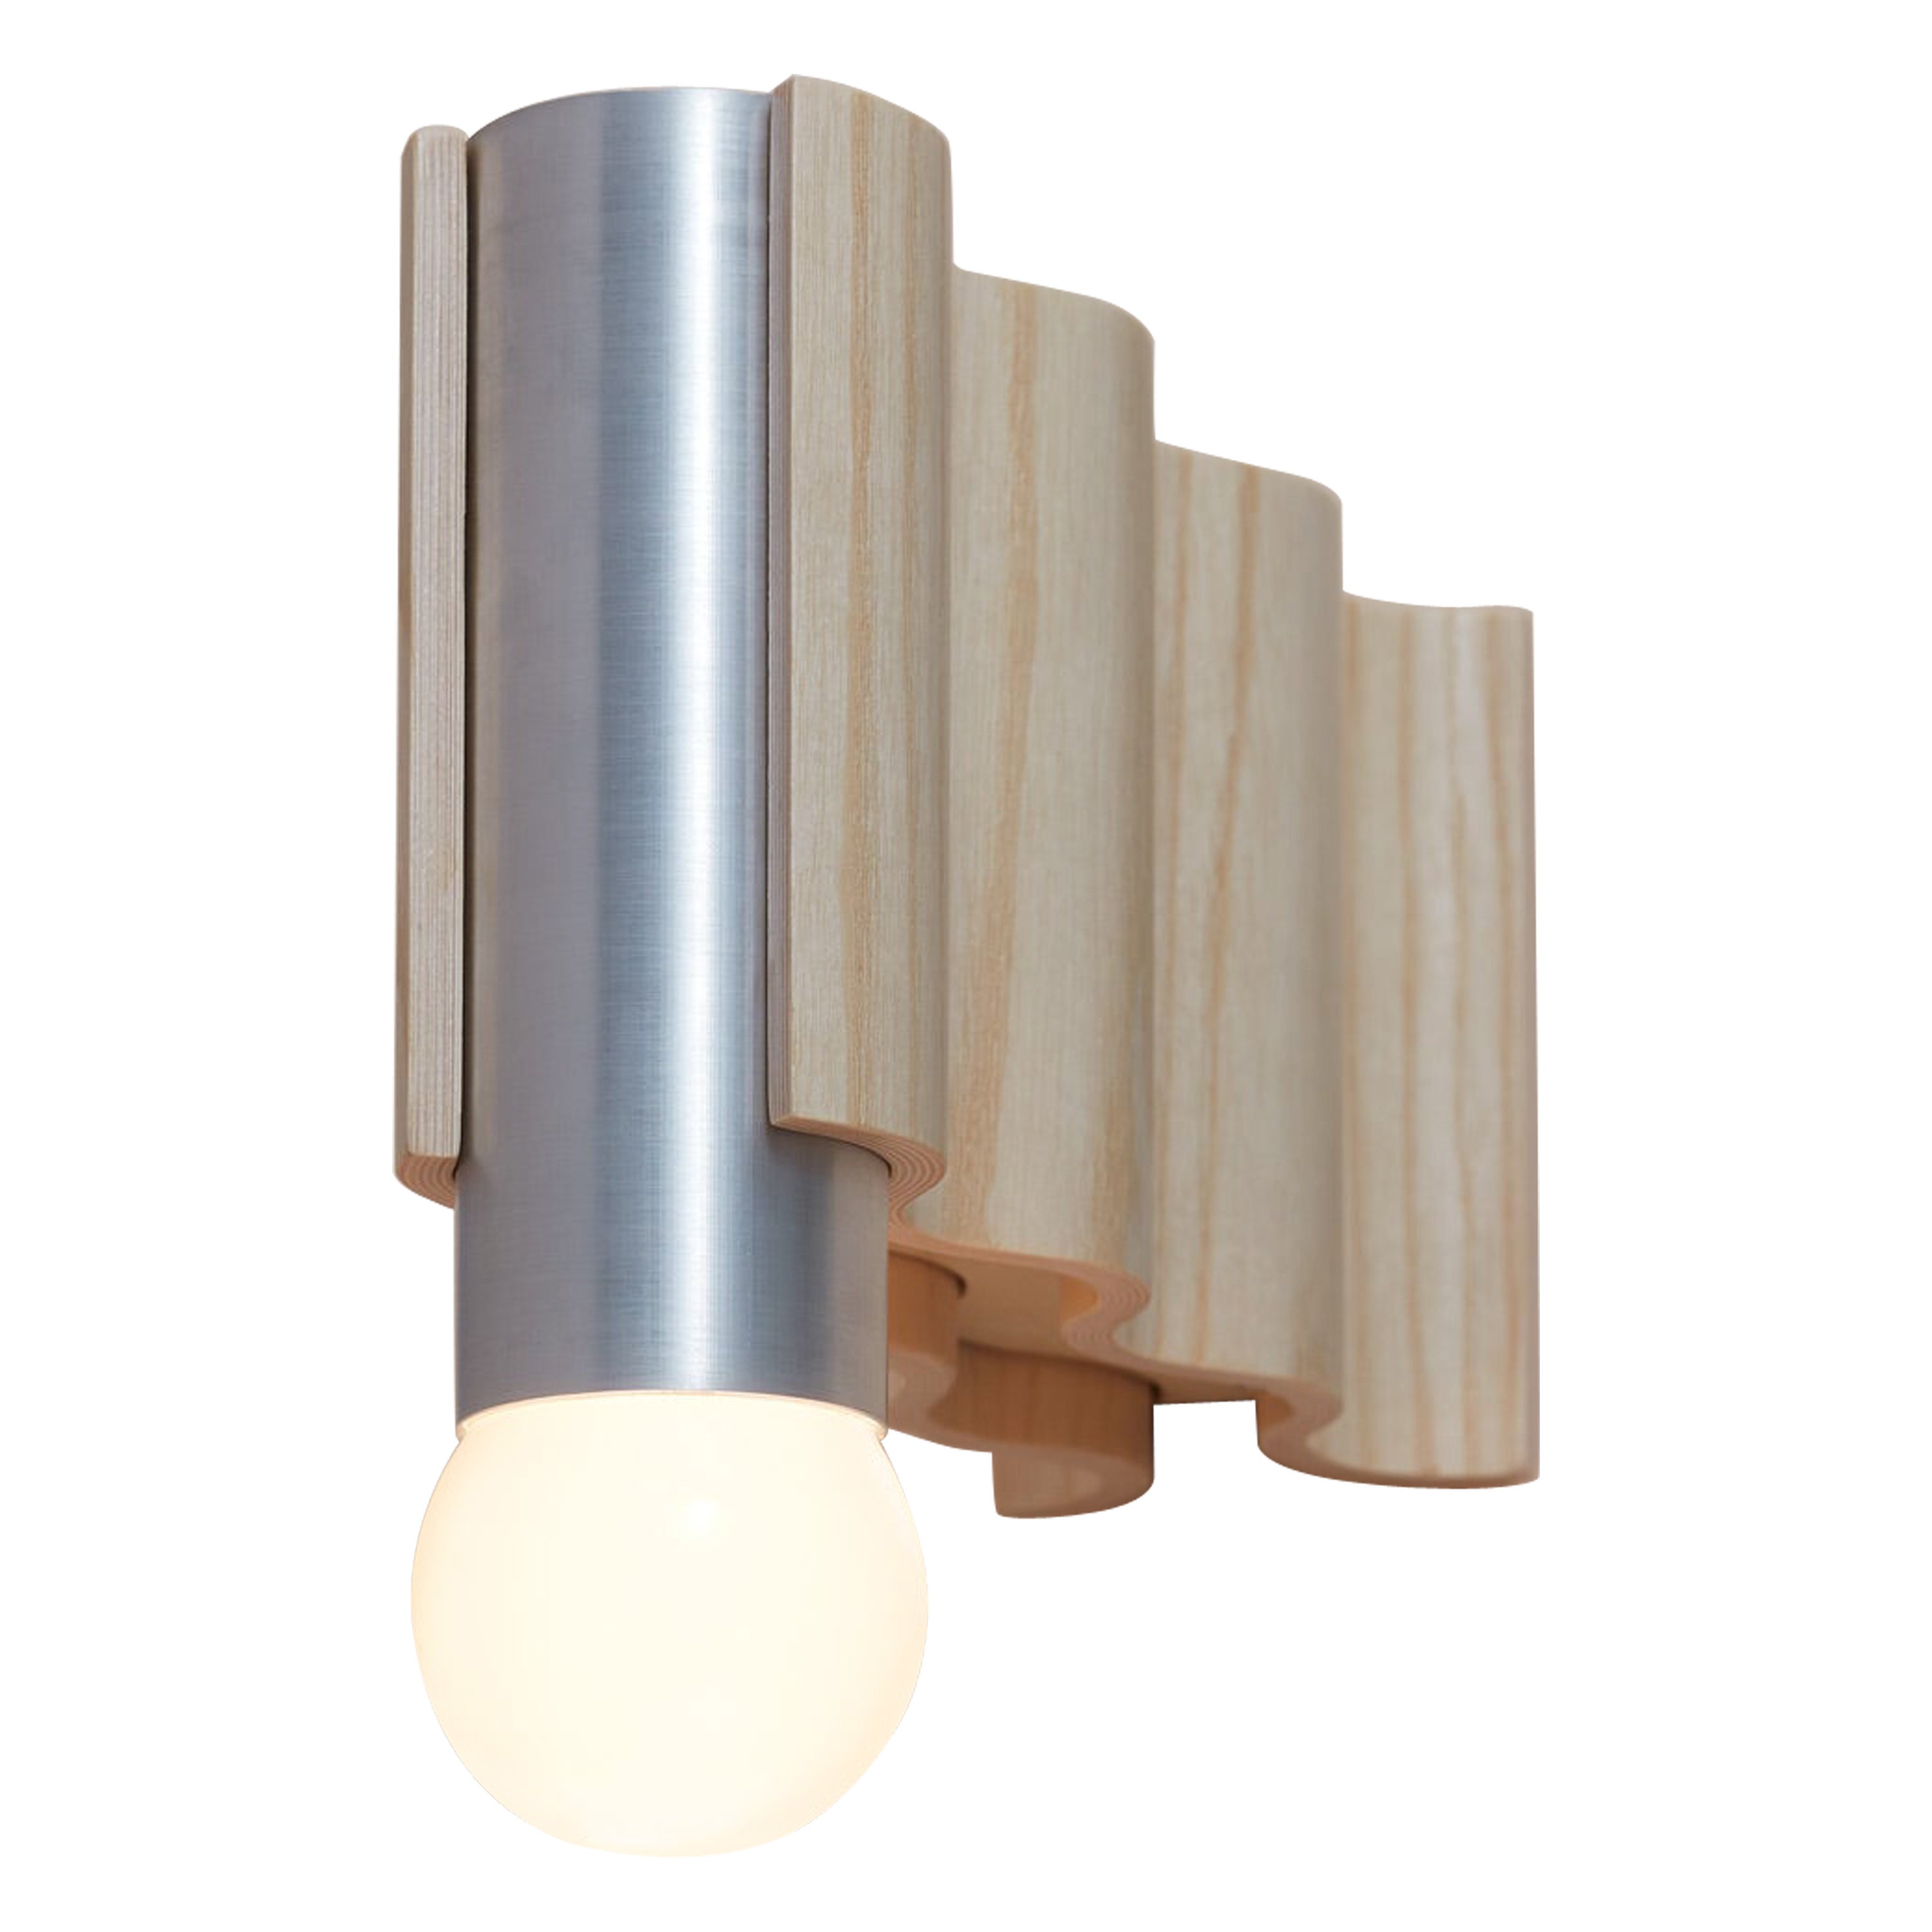 Single Corrugation Sconce / Wall Light in Natural Ash and Brushed Aluminium For Sale